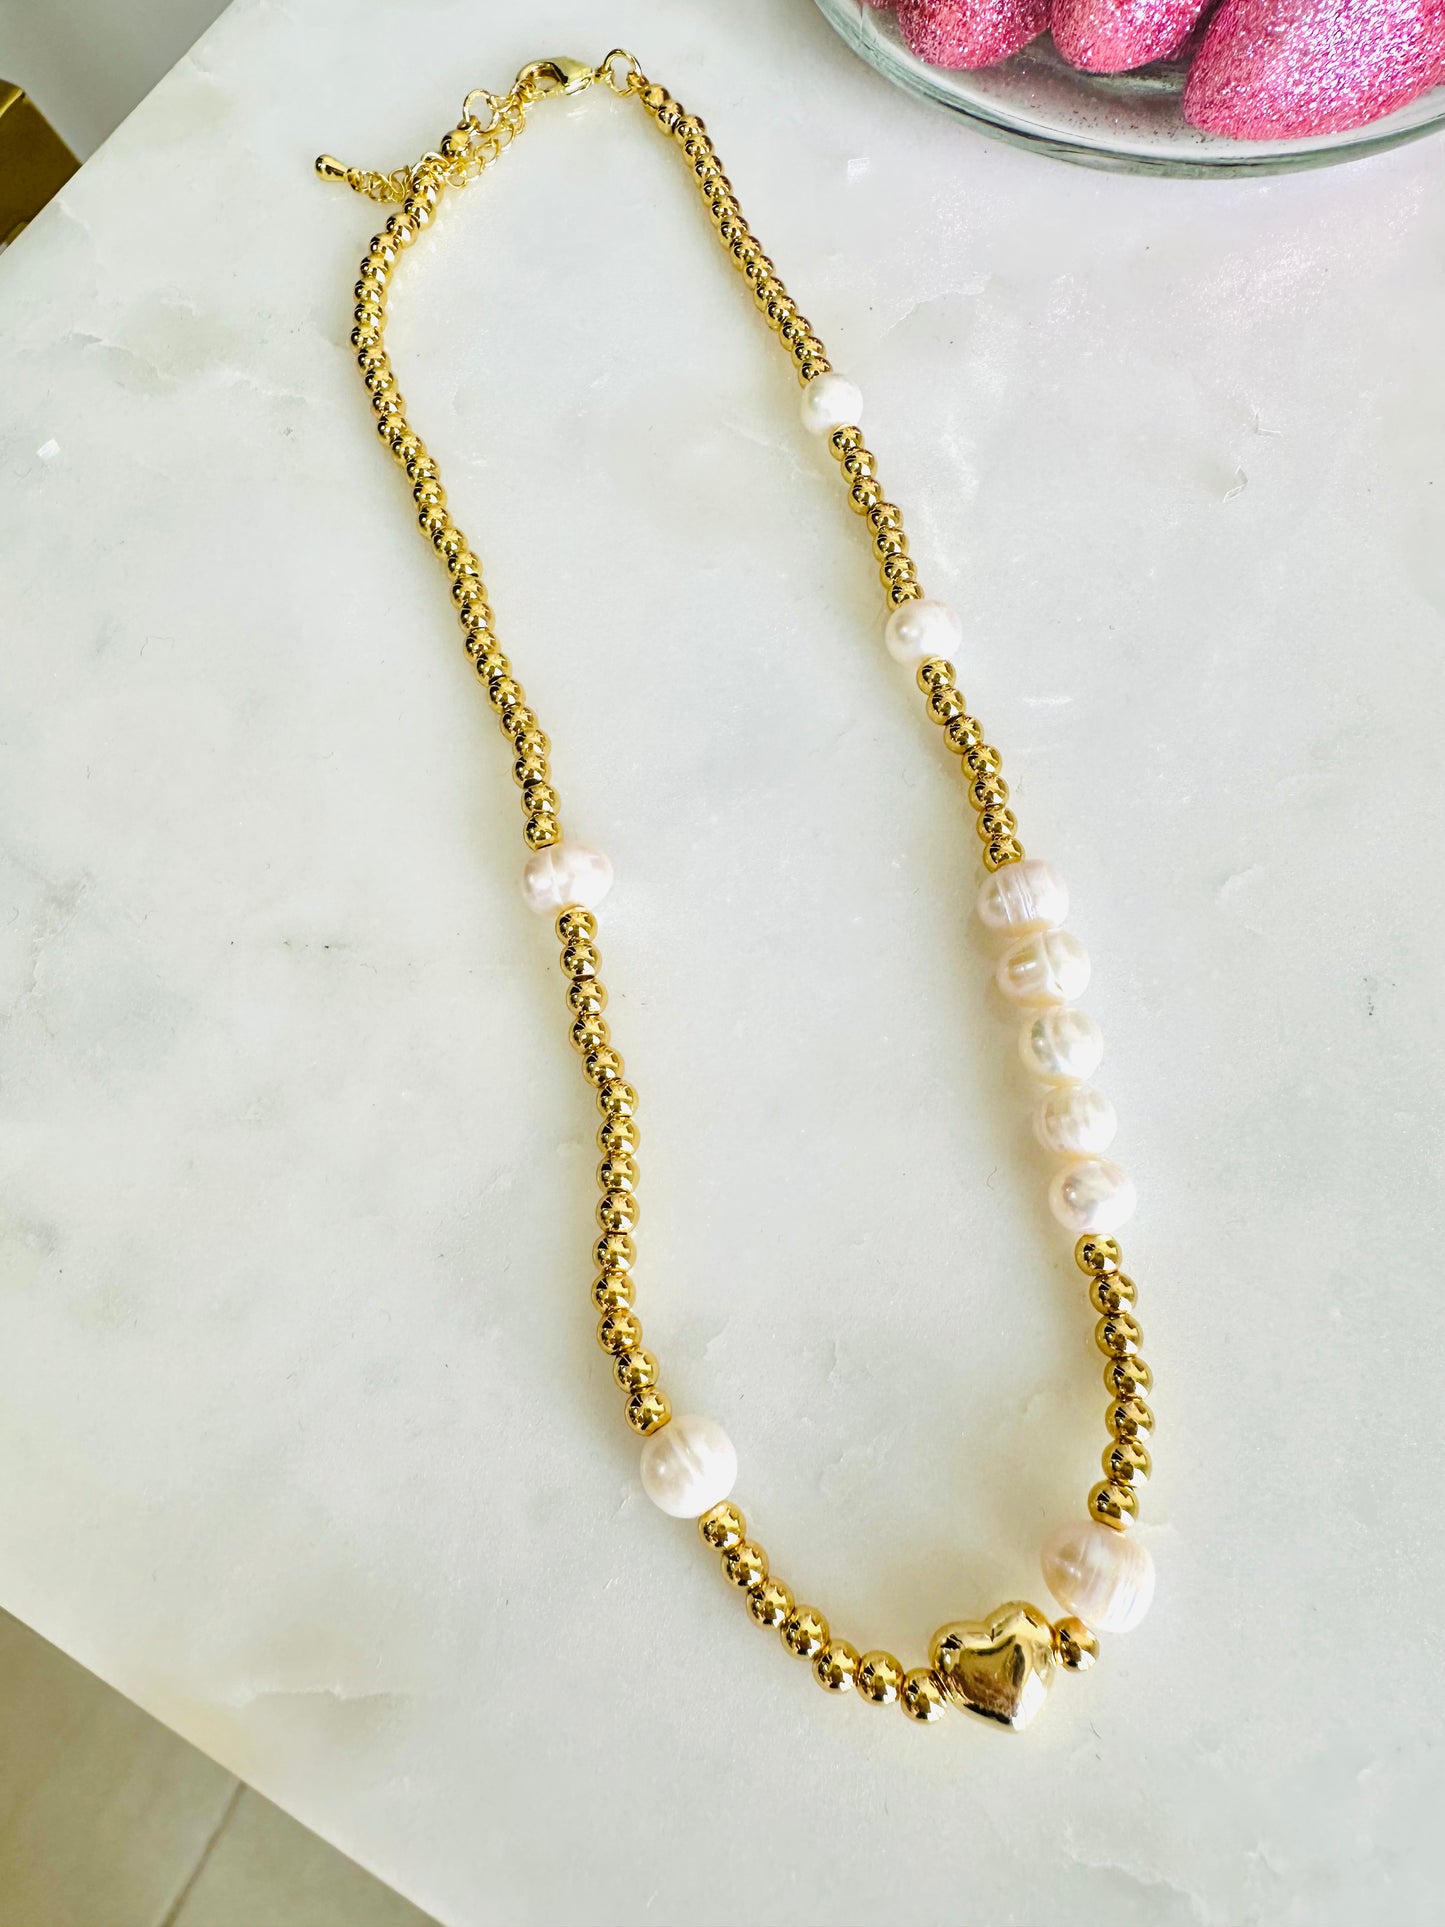 Gold Beads and Pearls Short Necklace